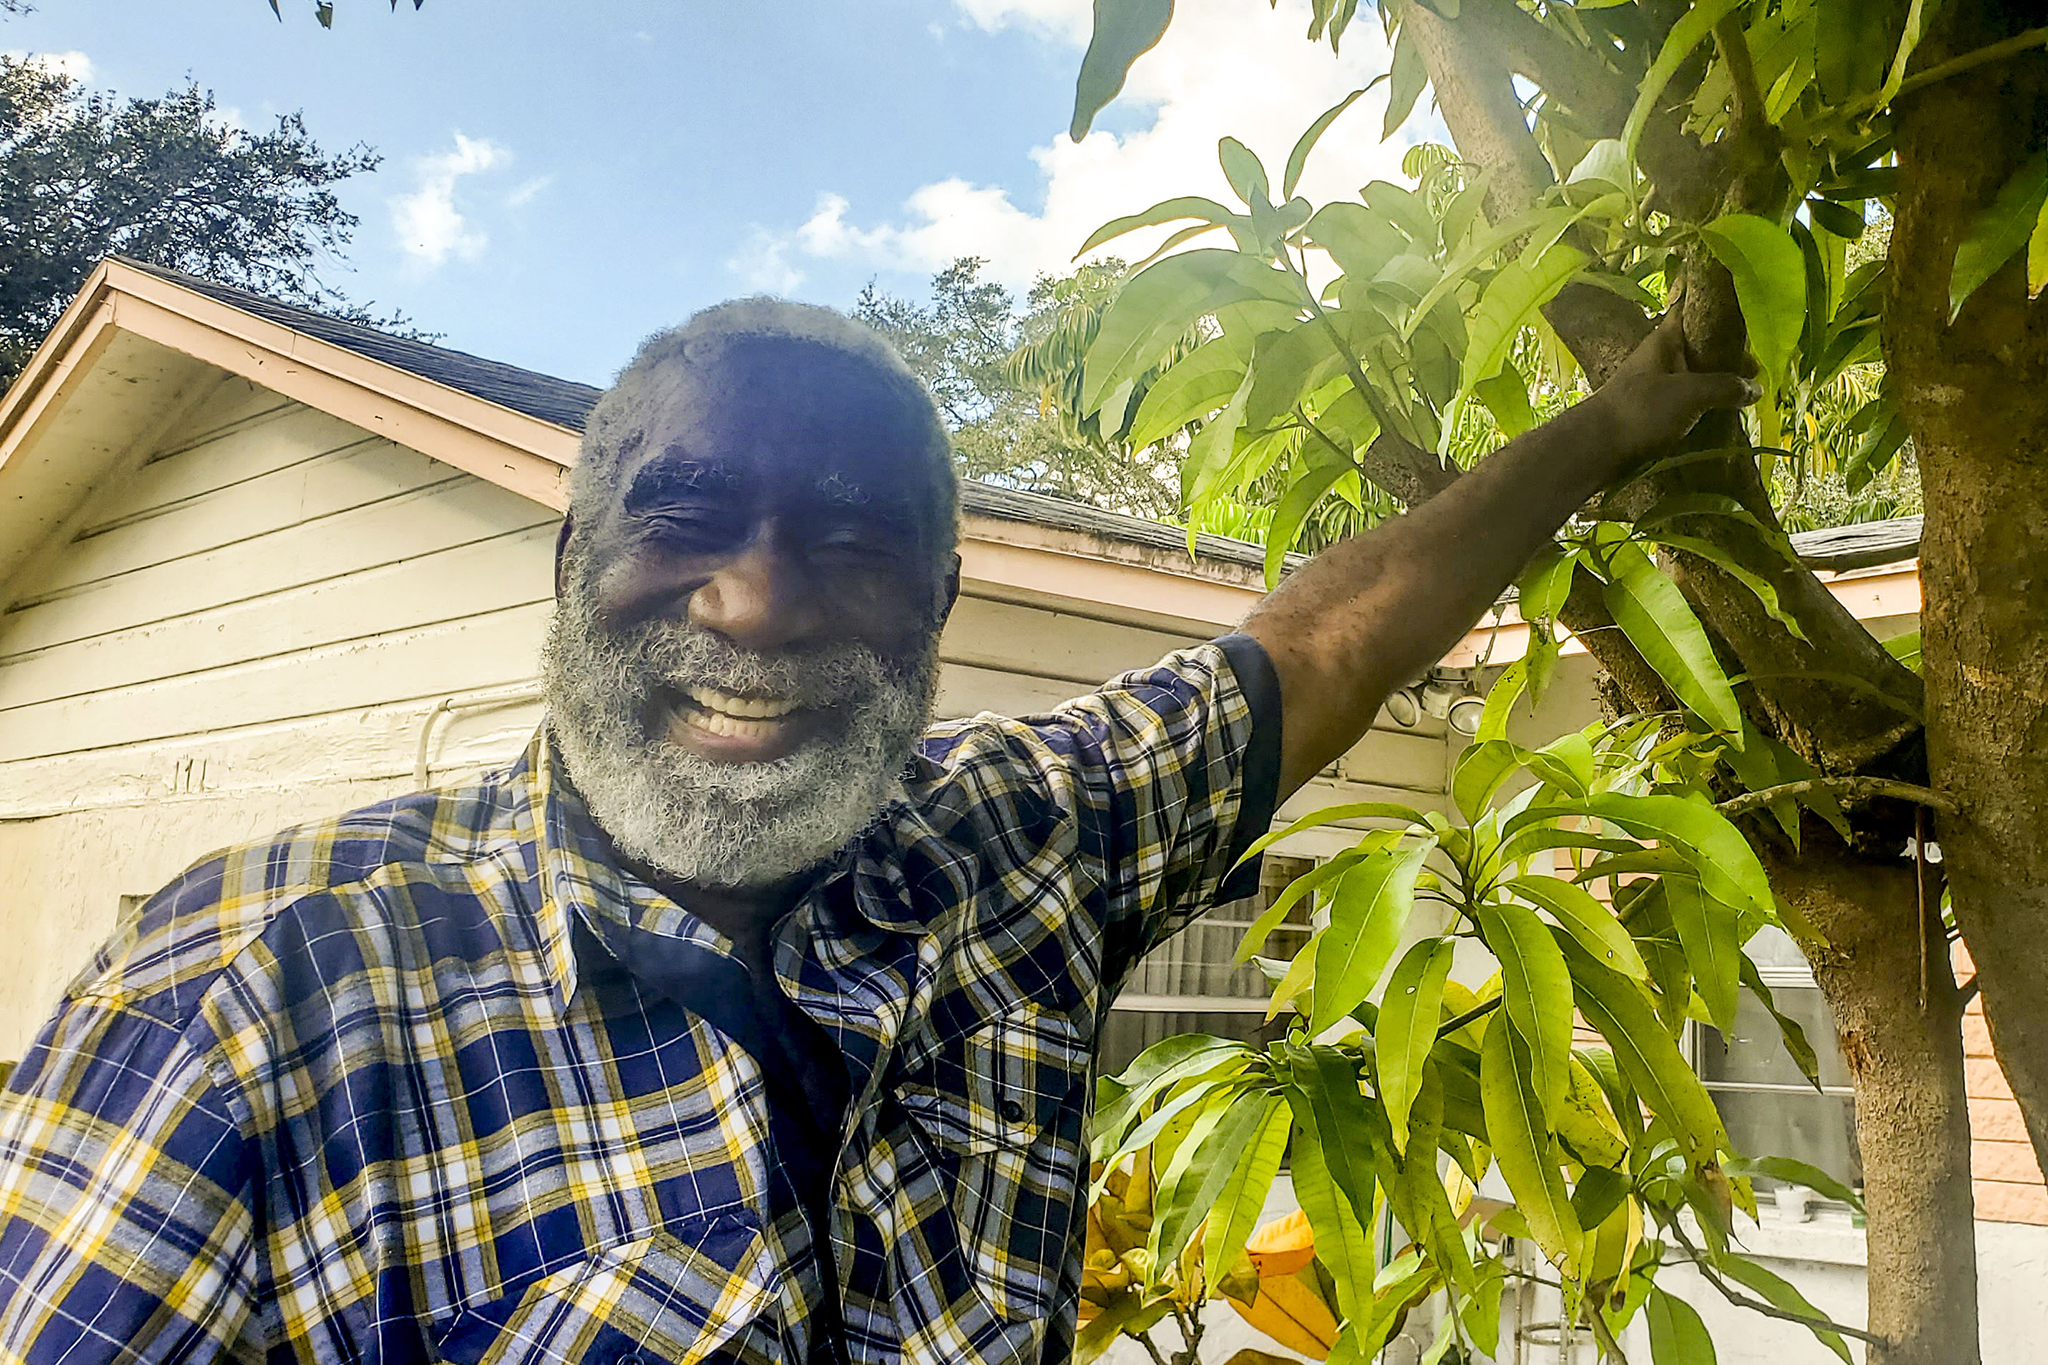 Fredd Atkins, an older African-American man, stands smiling with his hand resting on a mango tree in front of a house. It is a sunny day and blue skies can be seen in the background.